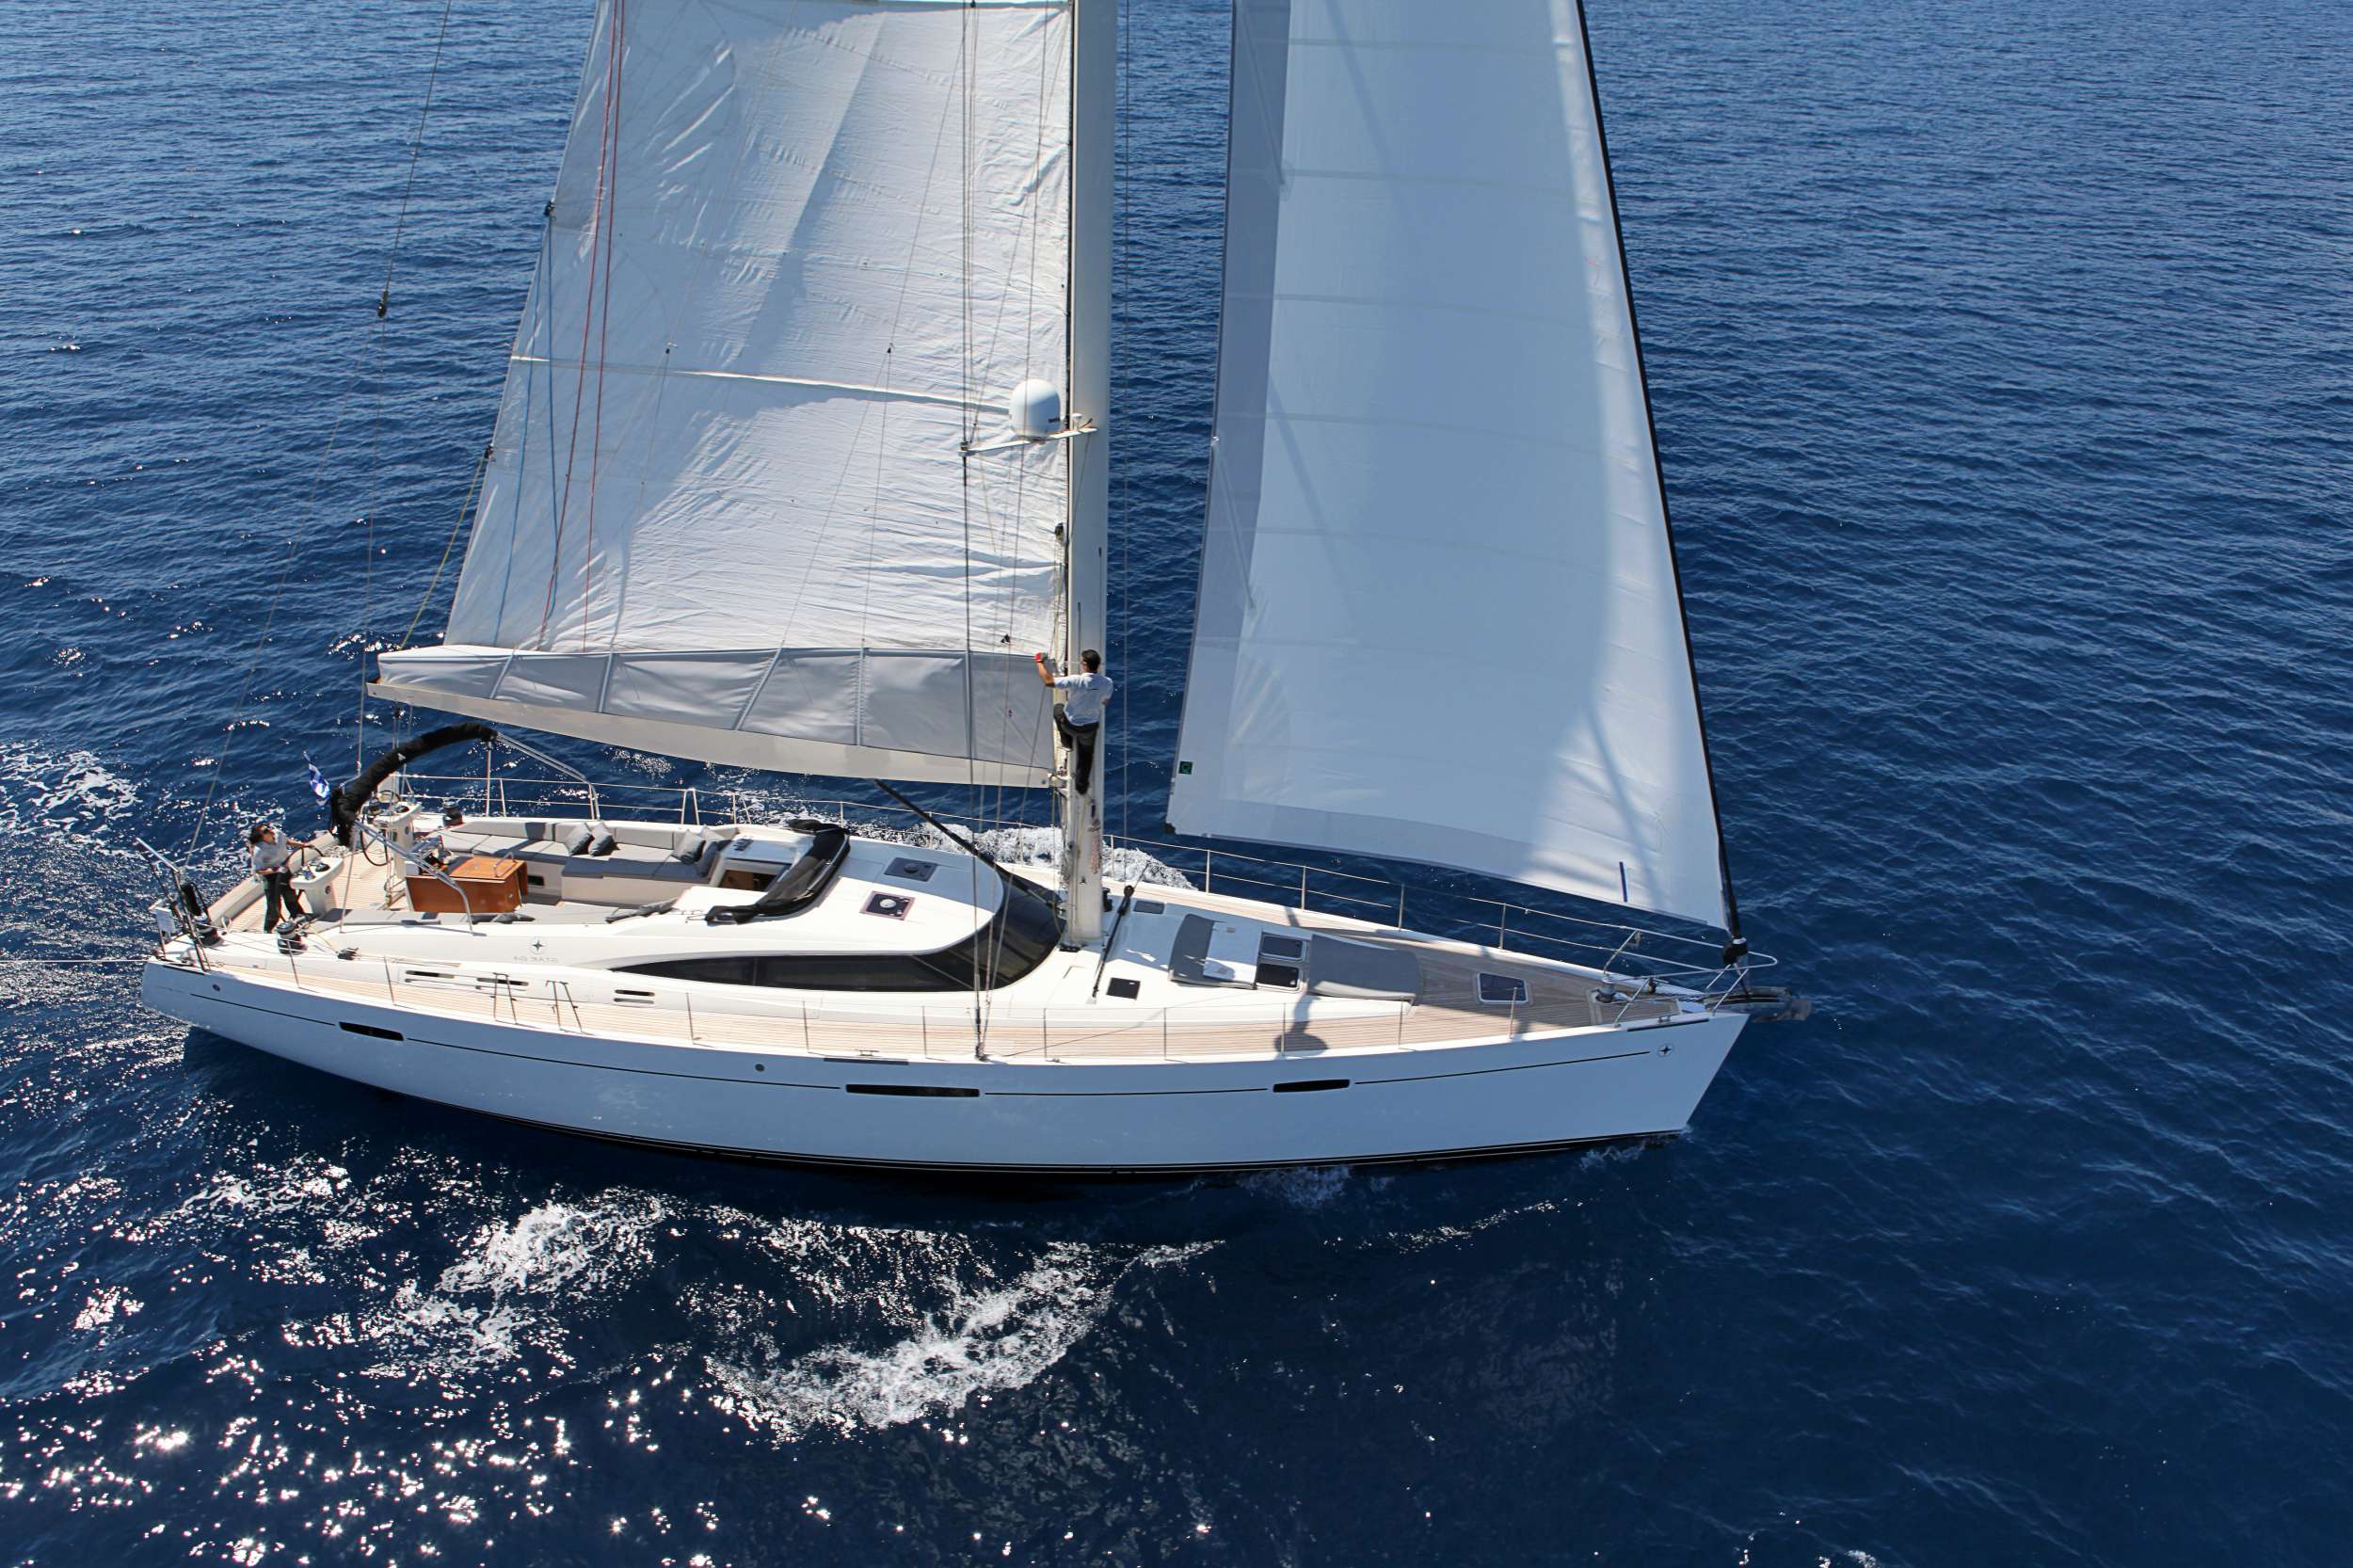 Shooting Star crewed Gianetti Star 64 yacht charter sailing in Greece